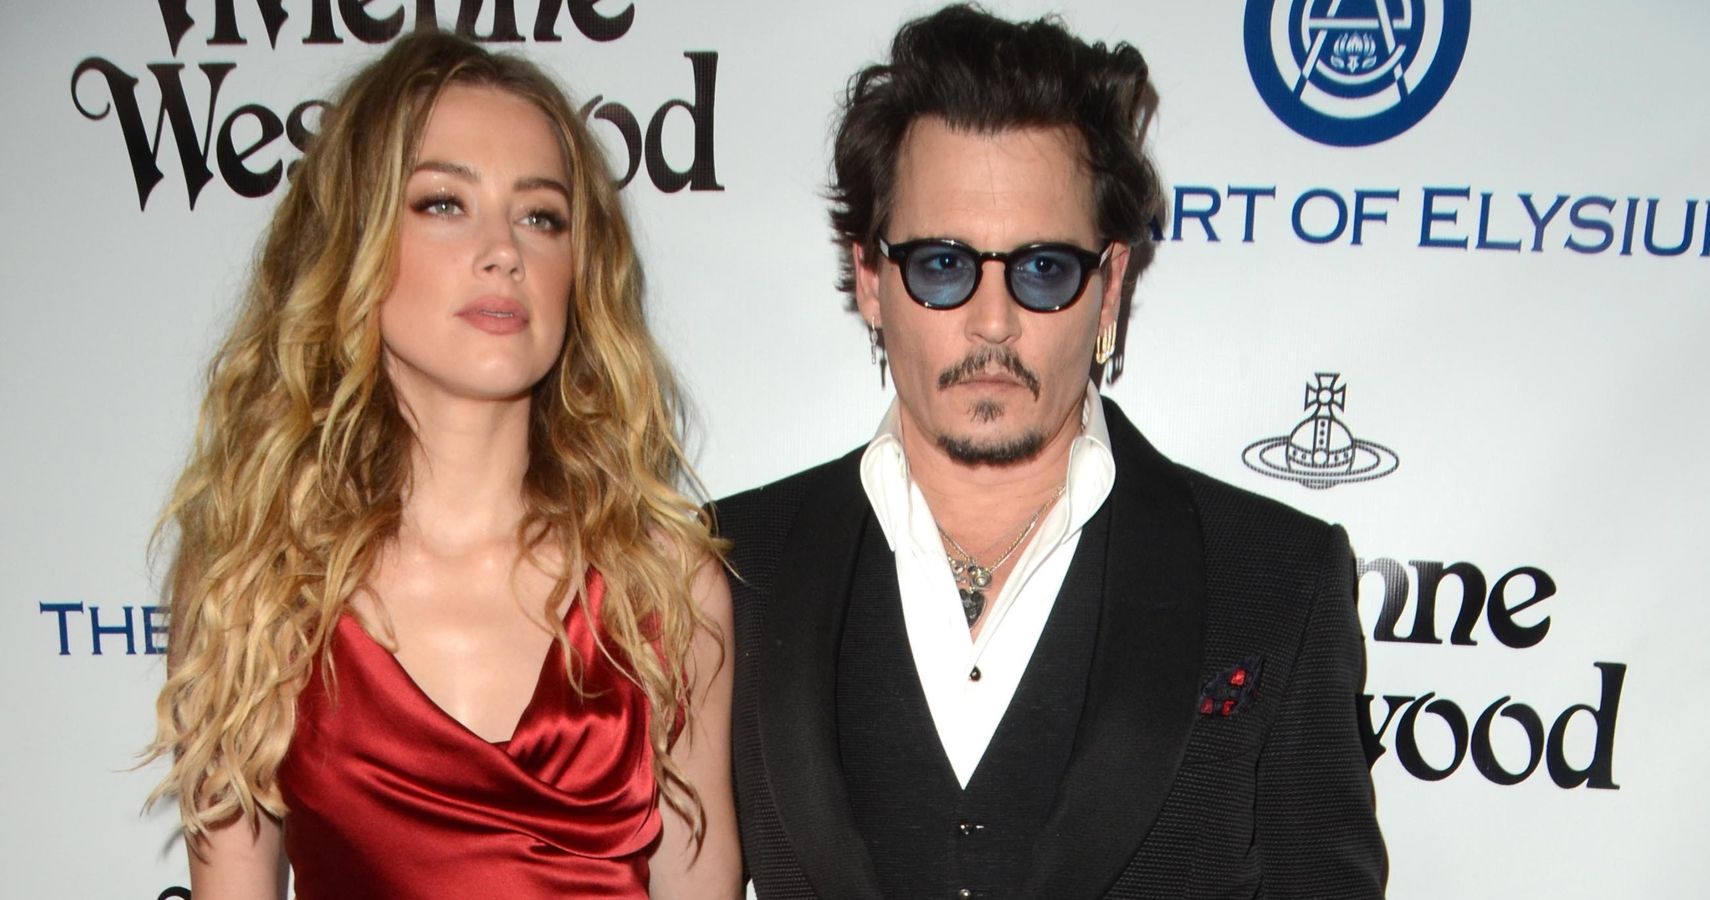 Johnny Depp and Amber Heard At An Event